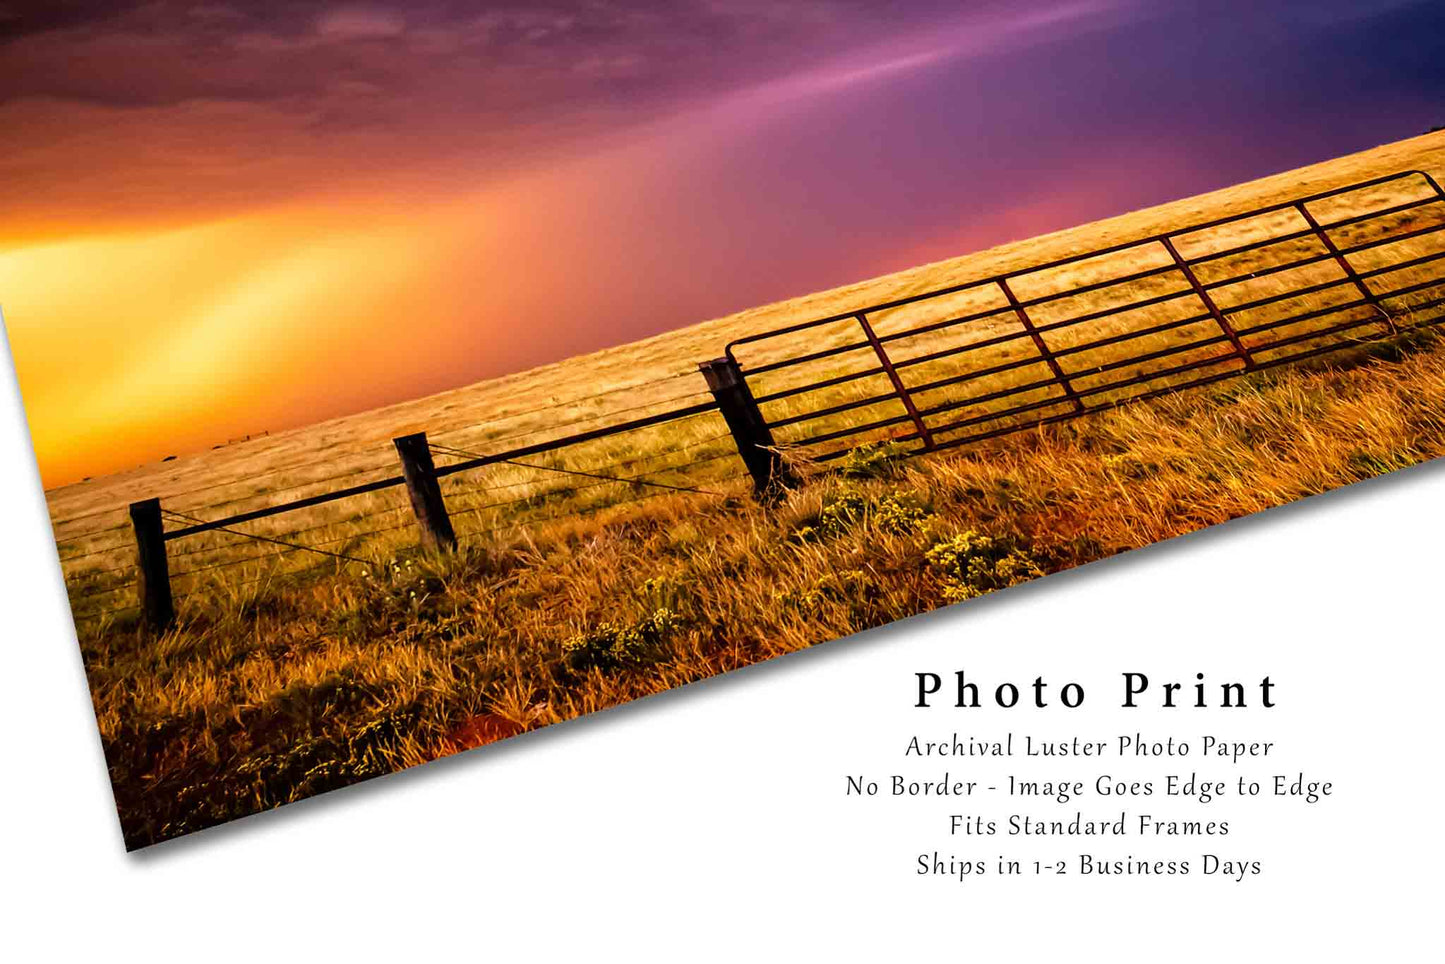 Storm Photography Print (Not Framed) Picture of Colorful Thunderstorm Over Fence Gate at Sunset in Oklahoma Great Plains Wall Art Western Decor